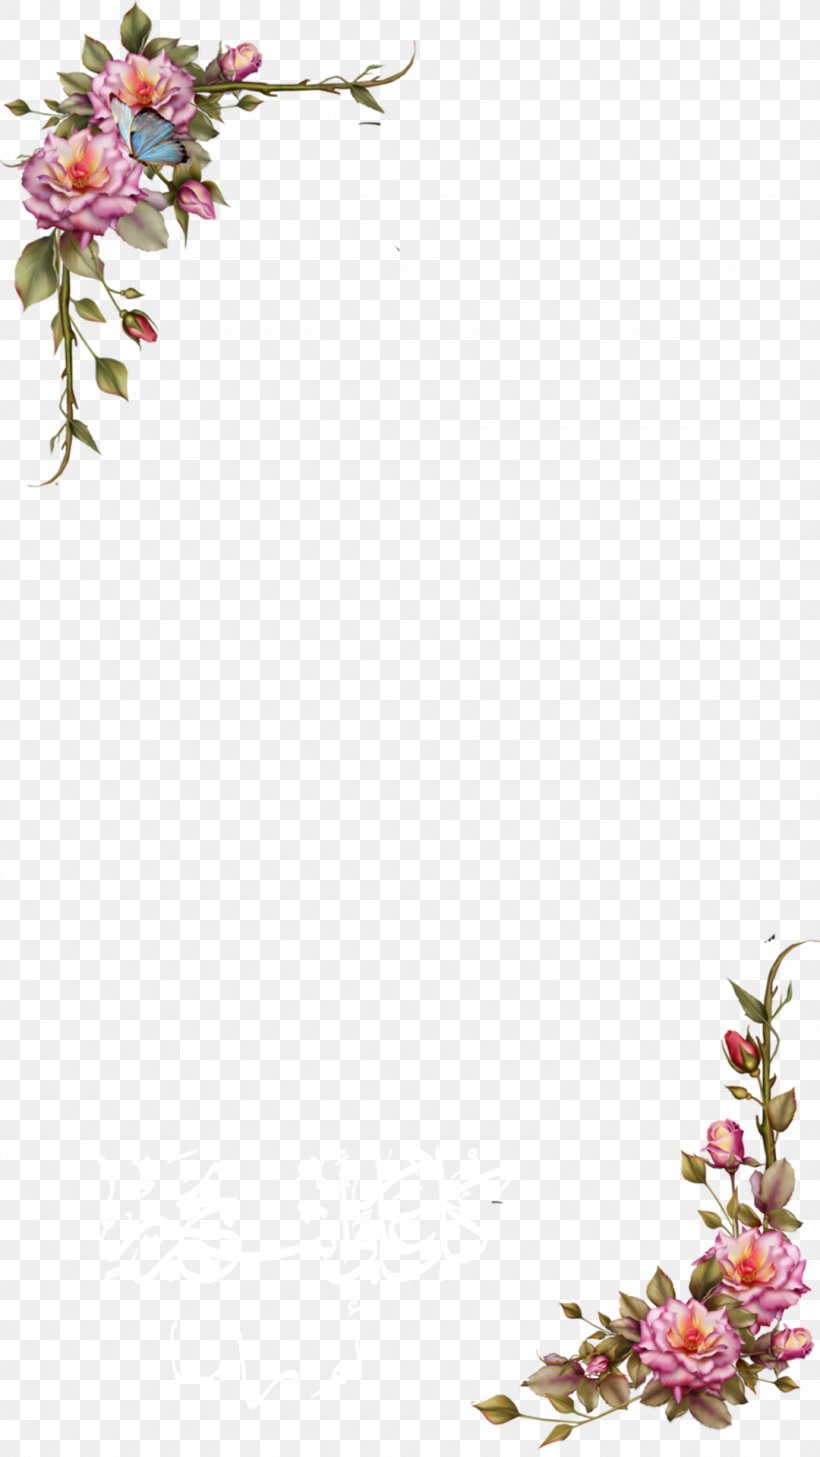 Wedding Invitation Picture Frames Clip Art, PNG, 1080x1920px, Wedding Invitation, Blossom, Branch, Bride, Cut Flowers Download Free